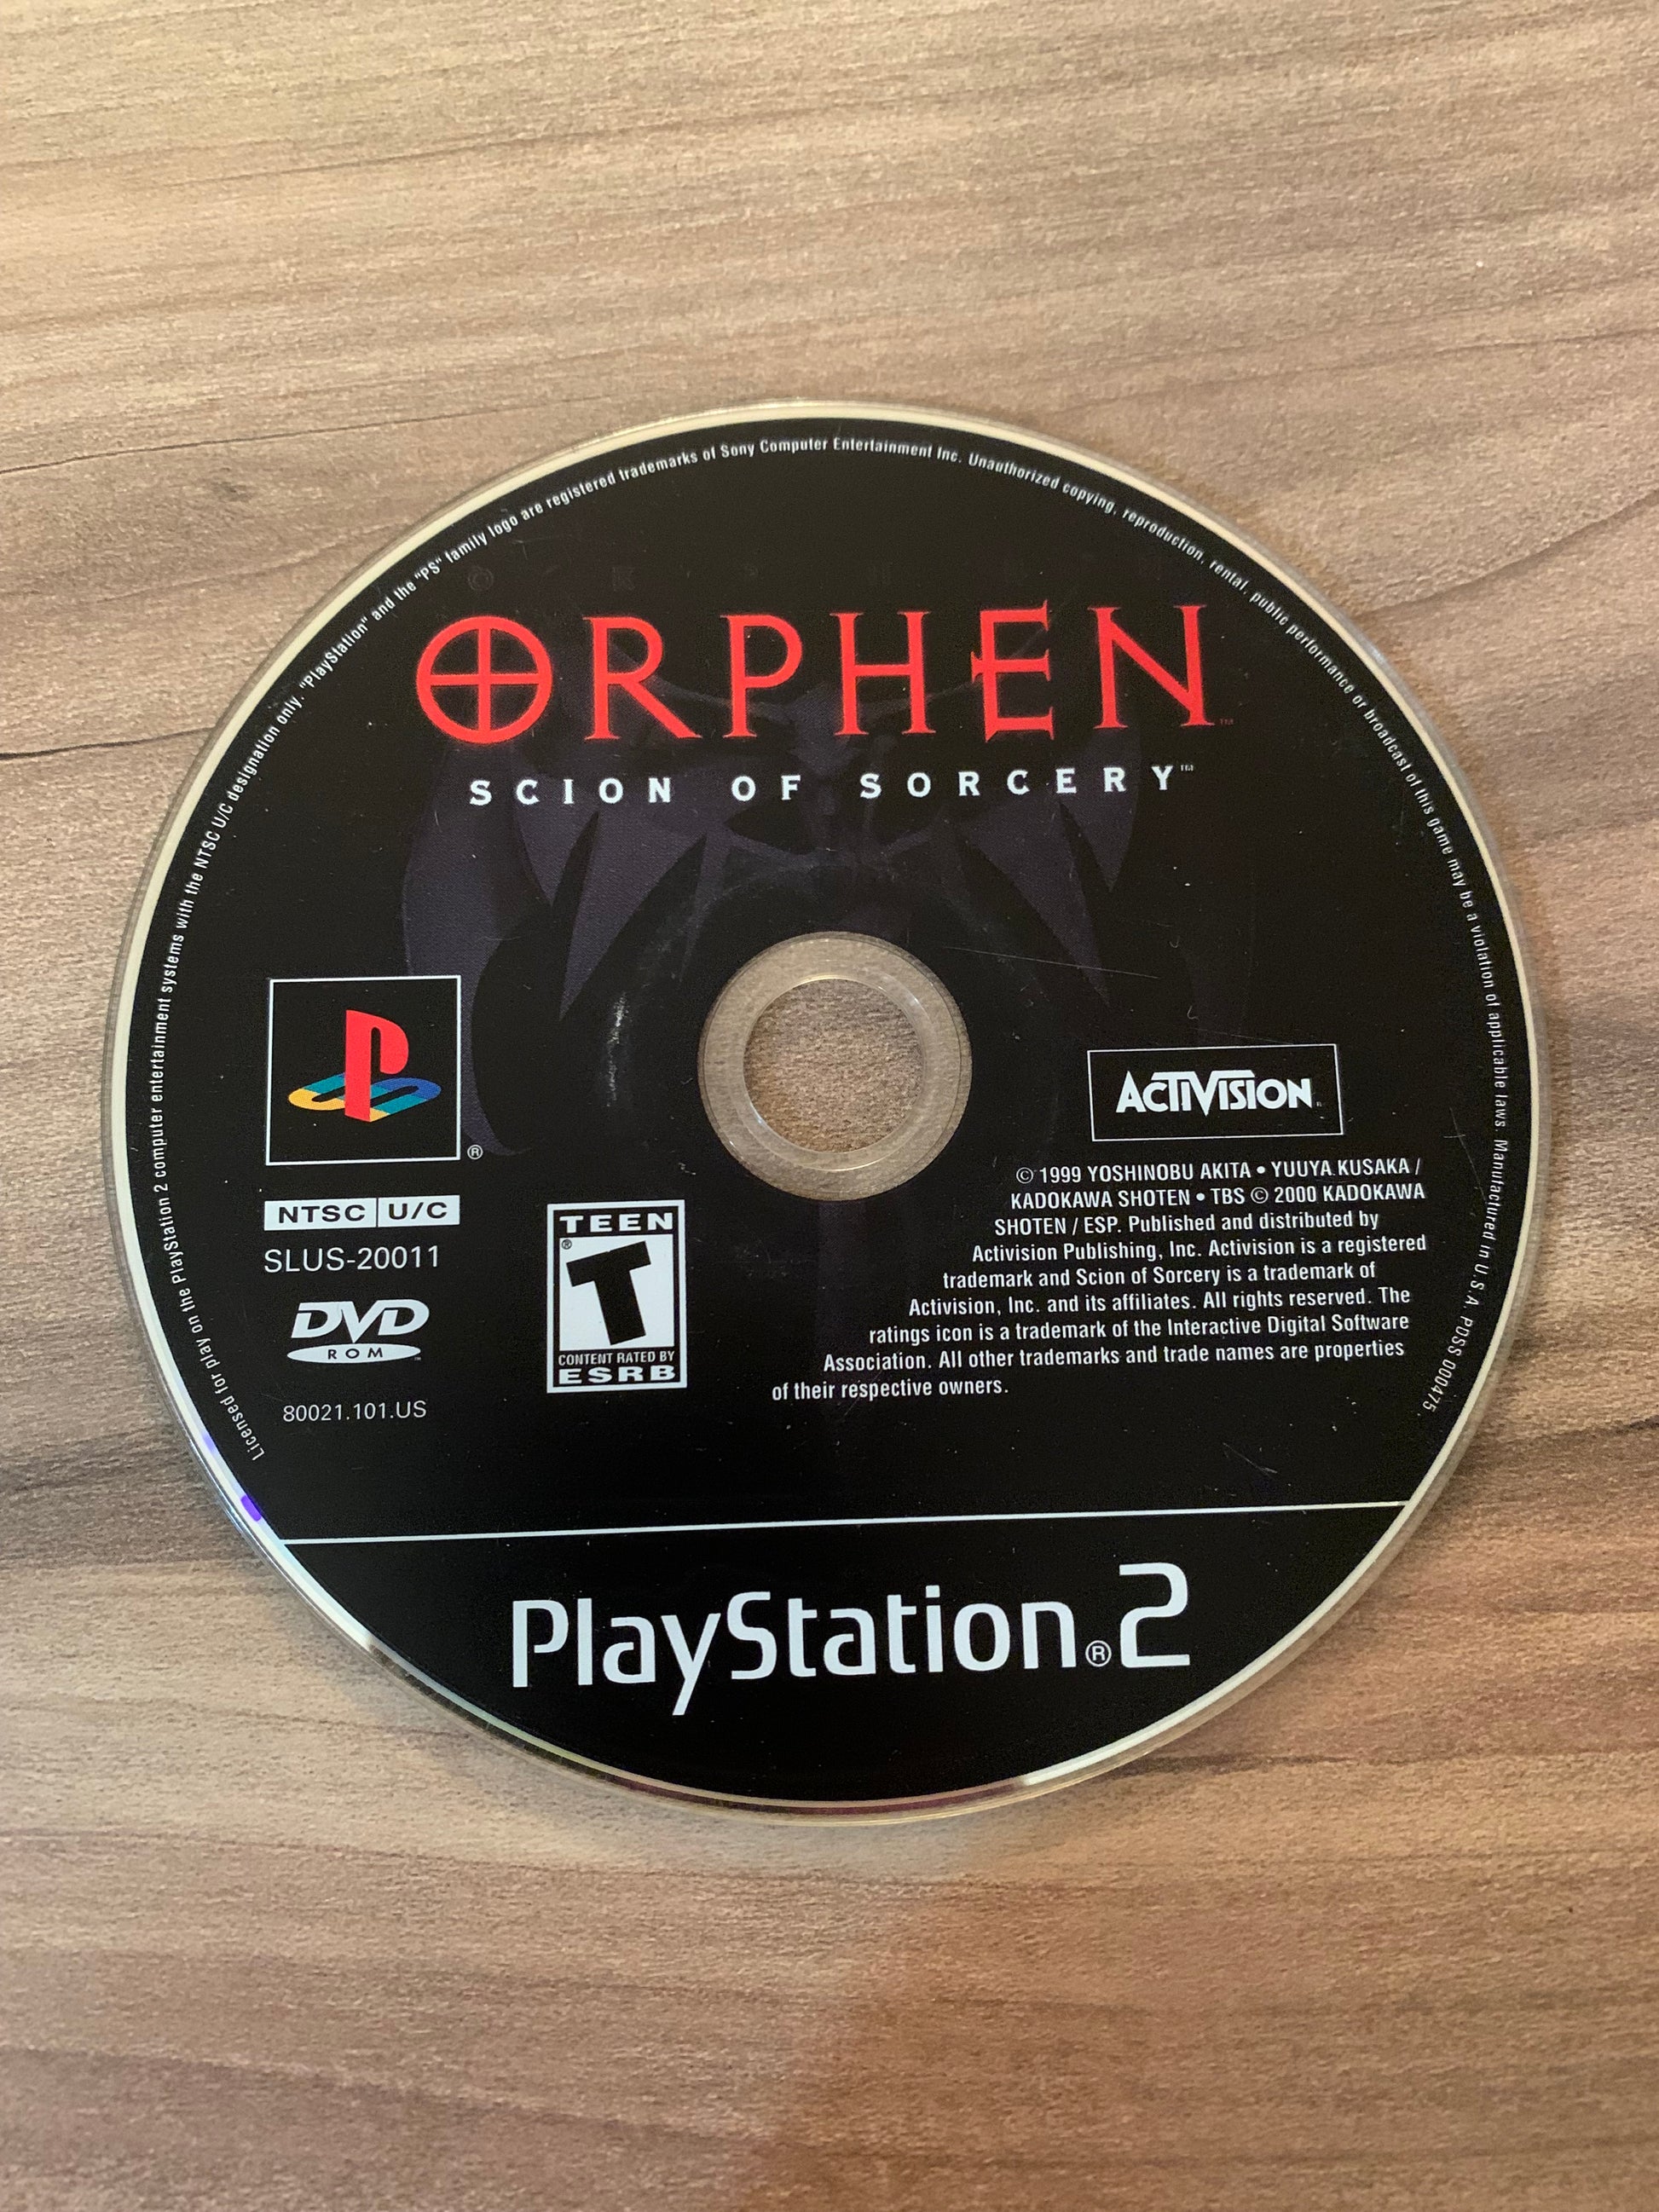 PiXEL-RETRO.COM : SONY PLAYSTATION 2 (PS2) GAME NTSC ORPHEN SCION OF SORCERY